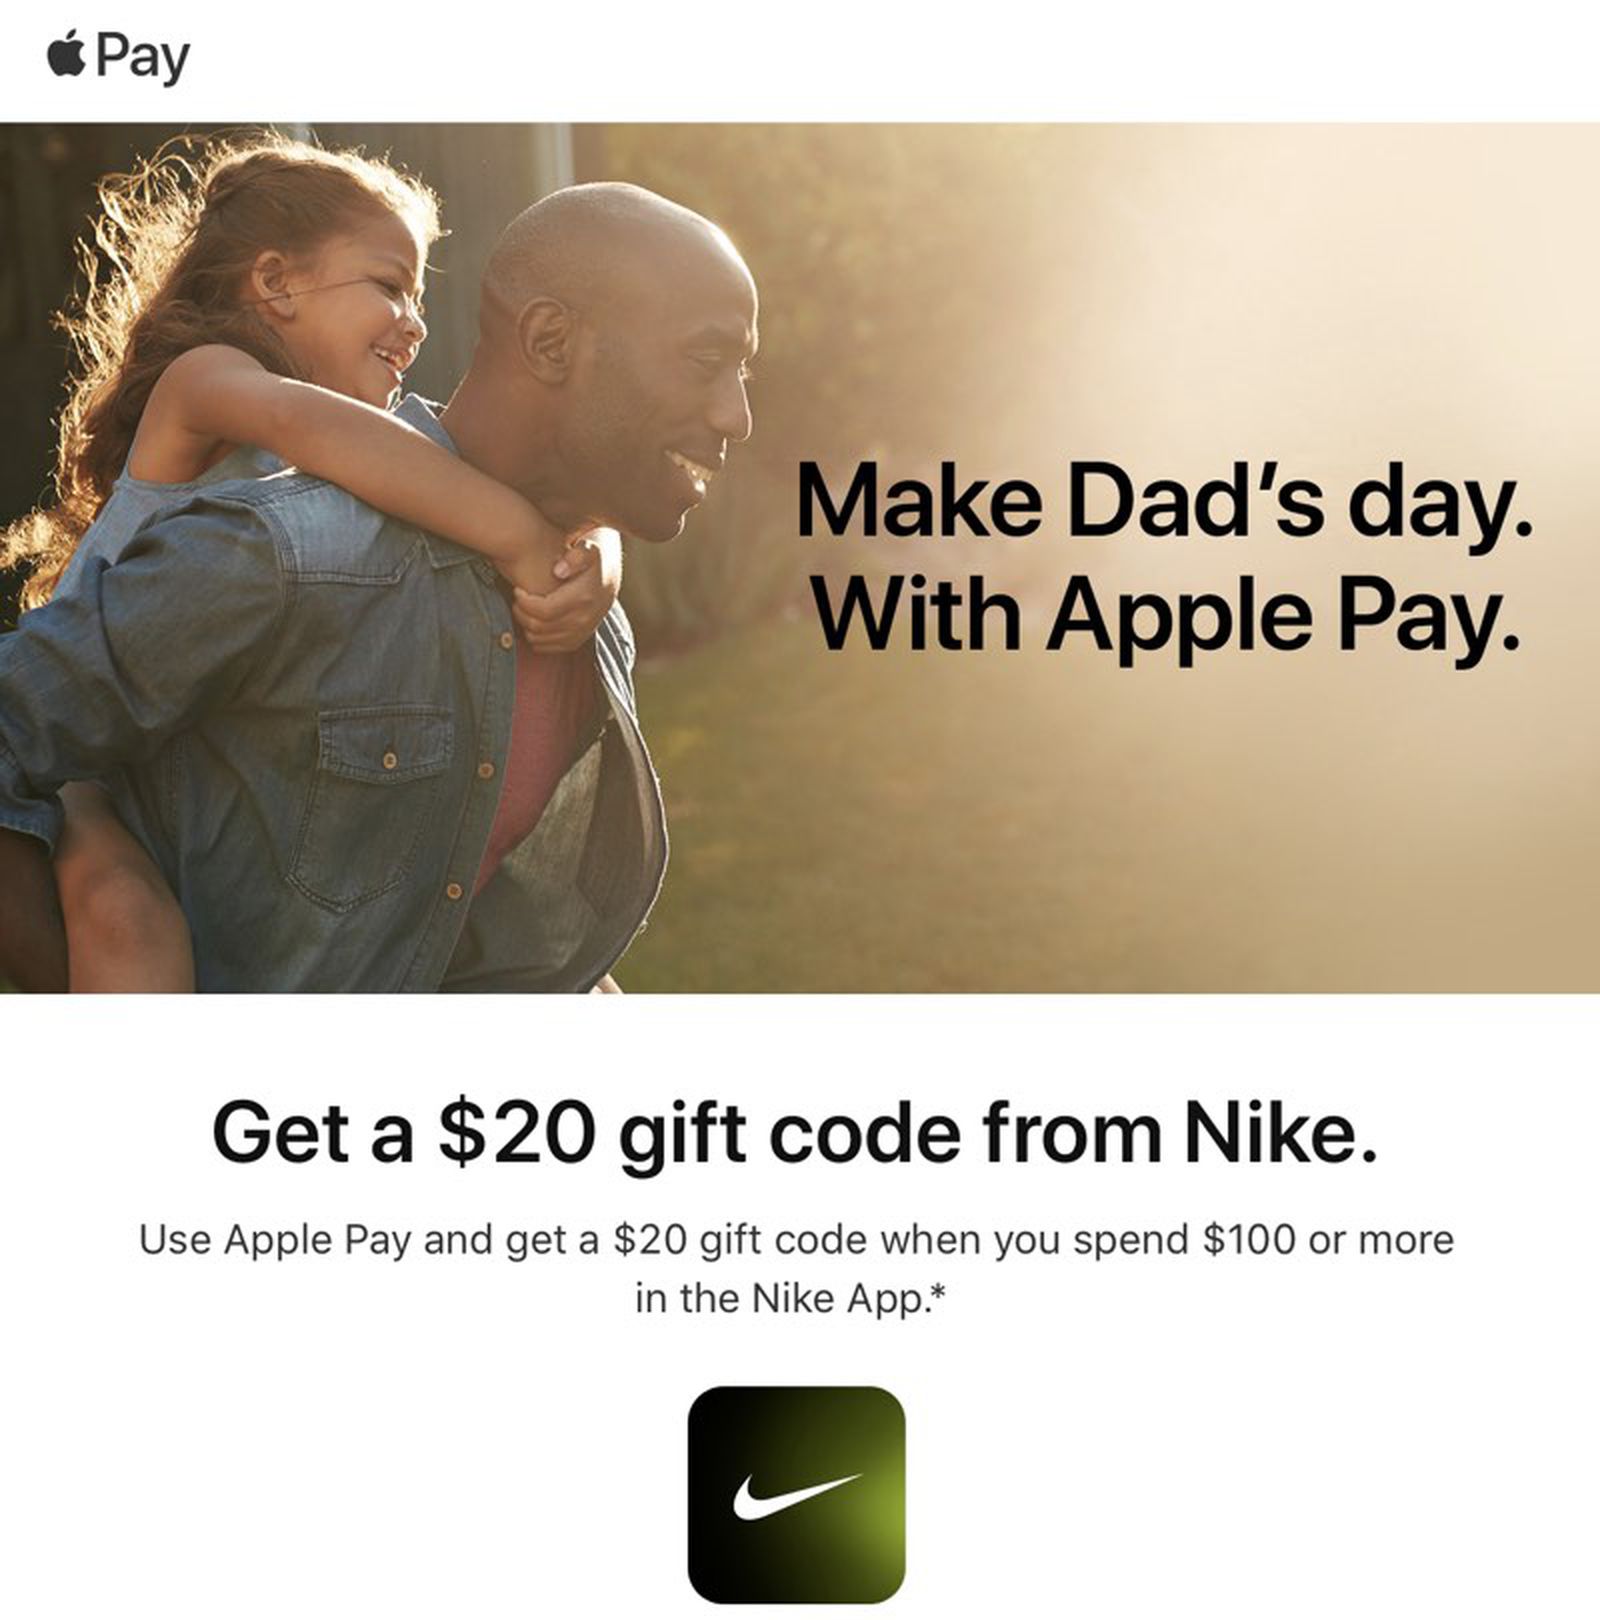 Apple Pay Promo Offers $20 Gift With $100+ Purchase From Nike App - MacRumors